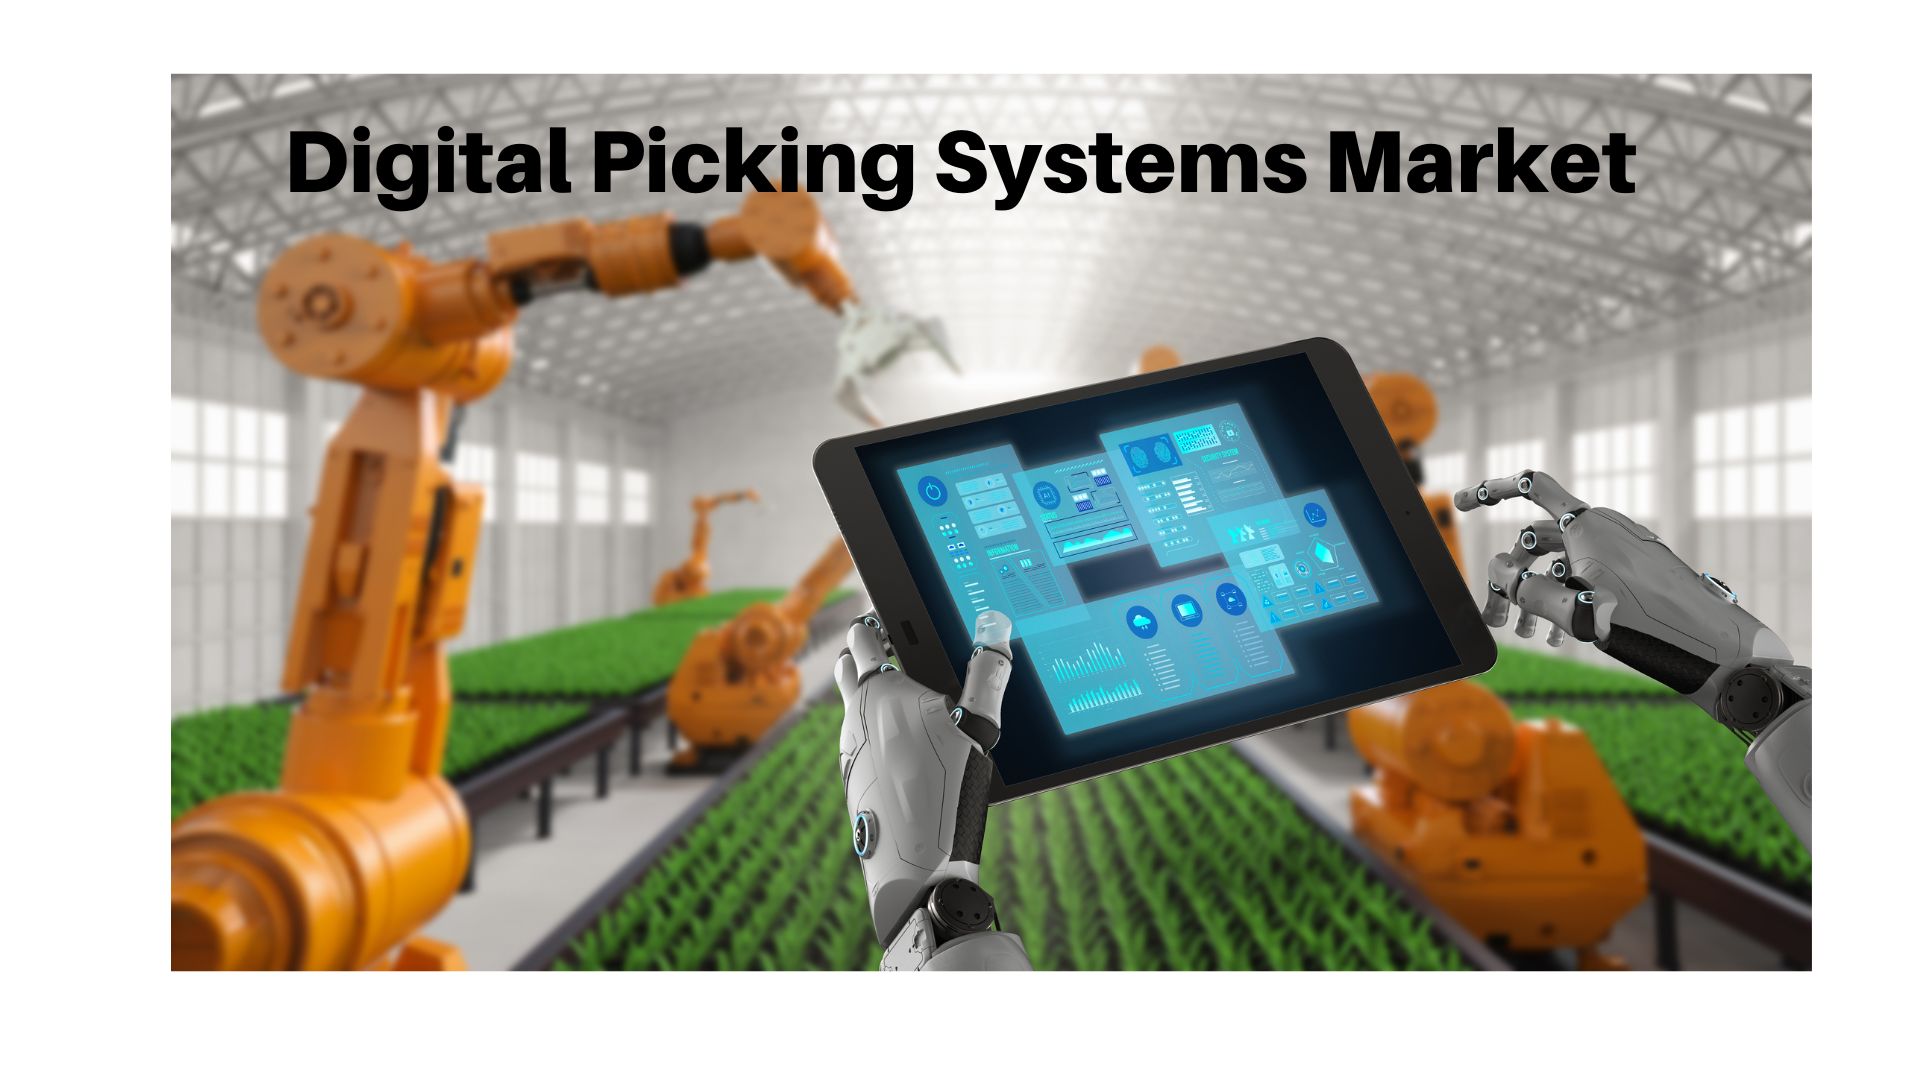 Digital Picking Systems Market to Reach USD $7.5 billion by 2033 | Significant CAGR of 10.2%